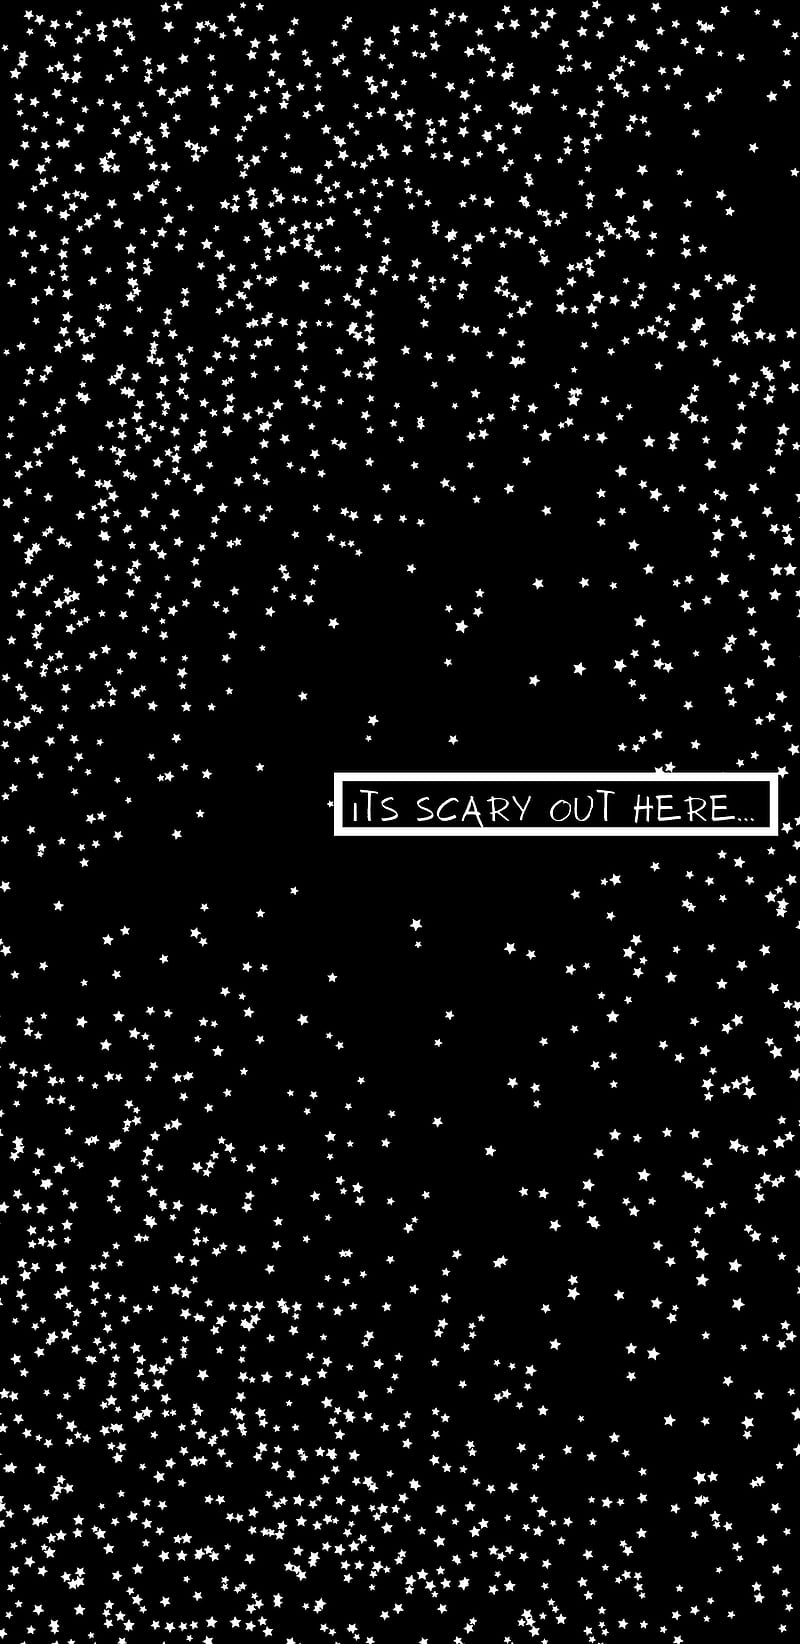 Its scary out here wallpaper - Black quotes